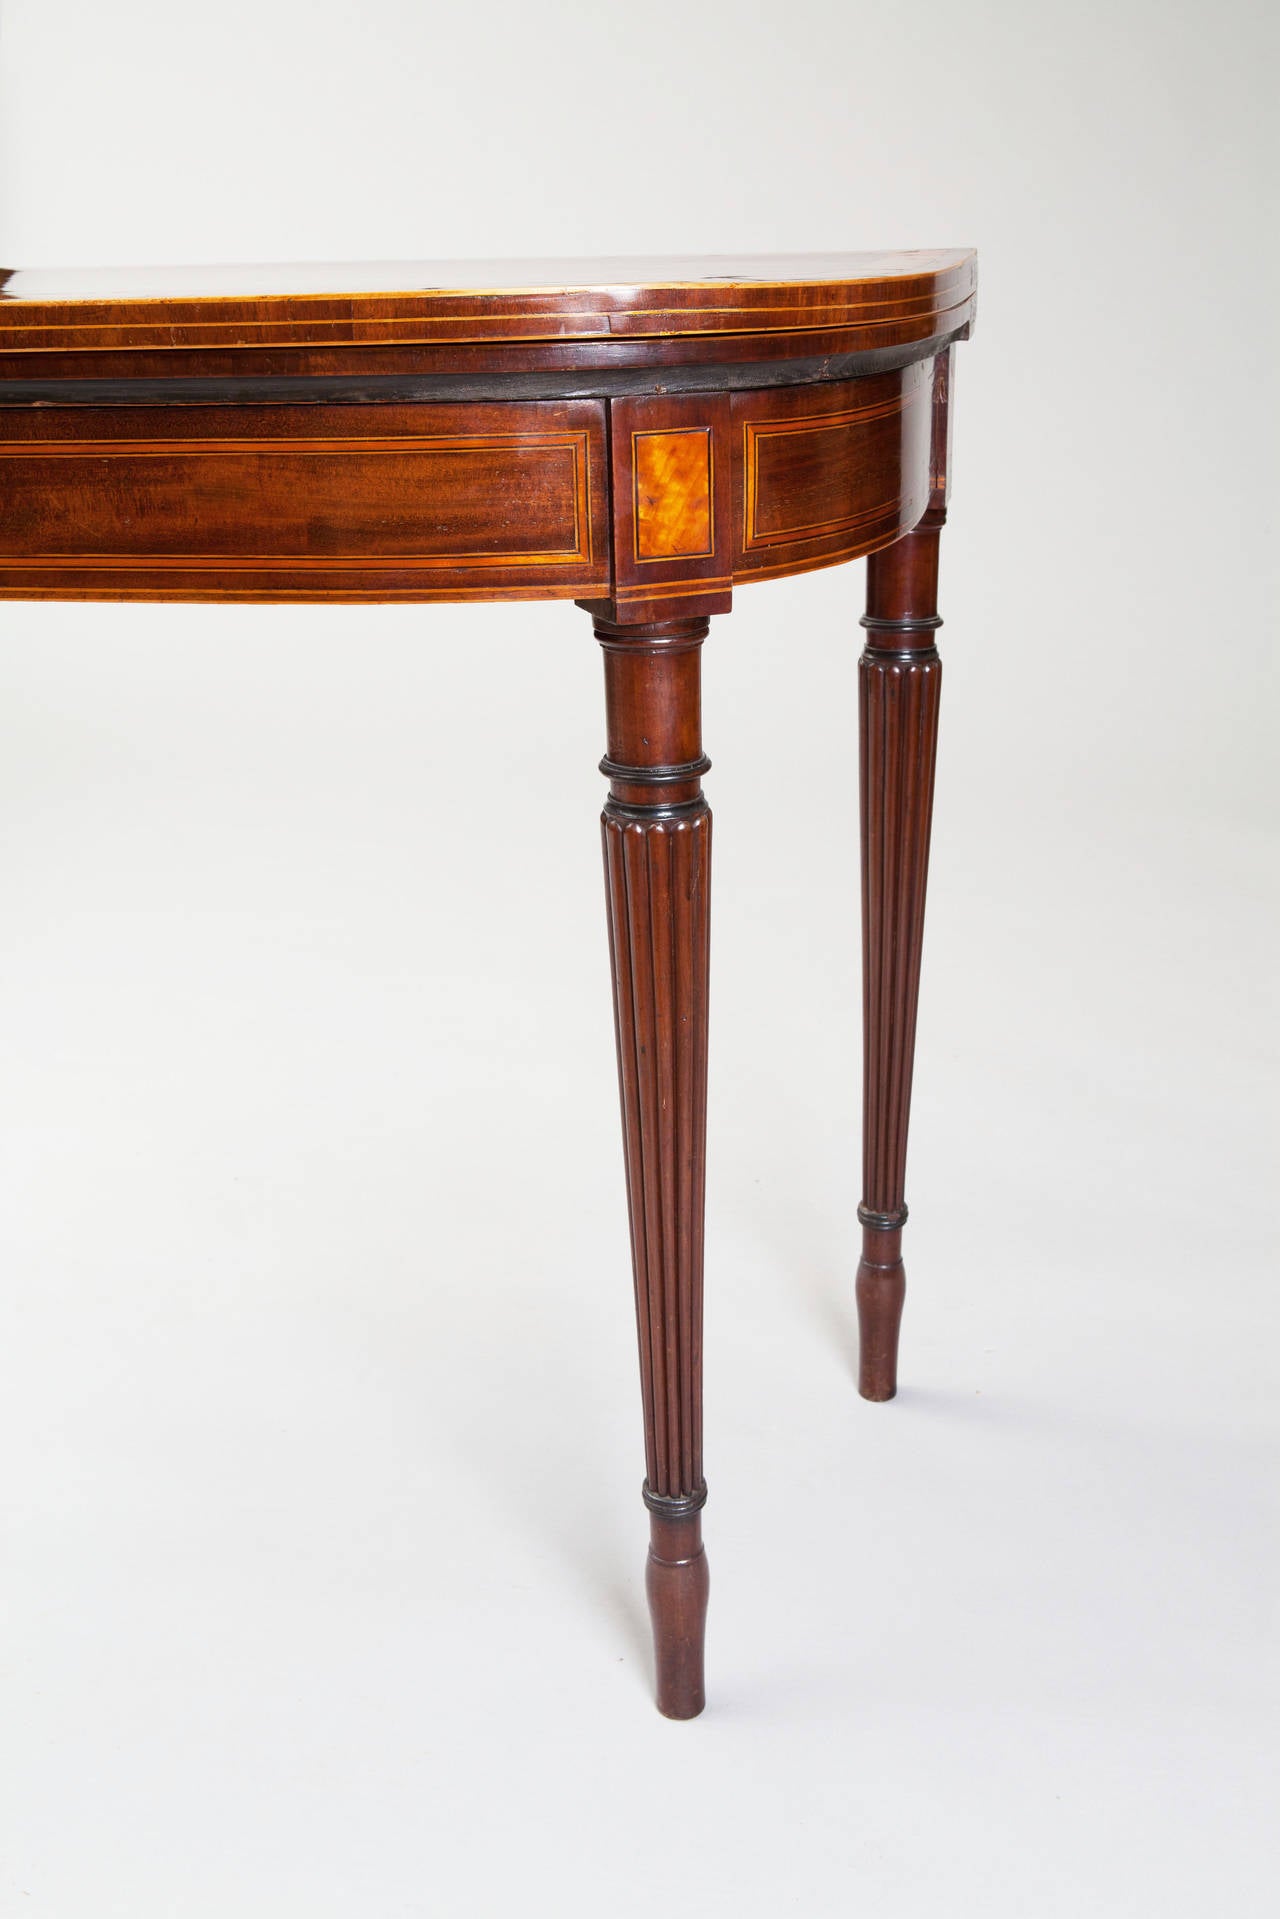 George III Mahogany Card Tables Attributed to Gillows 2